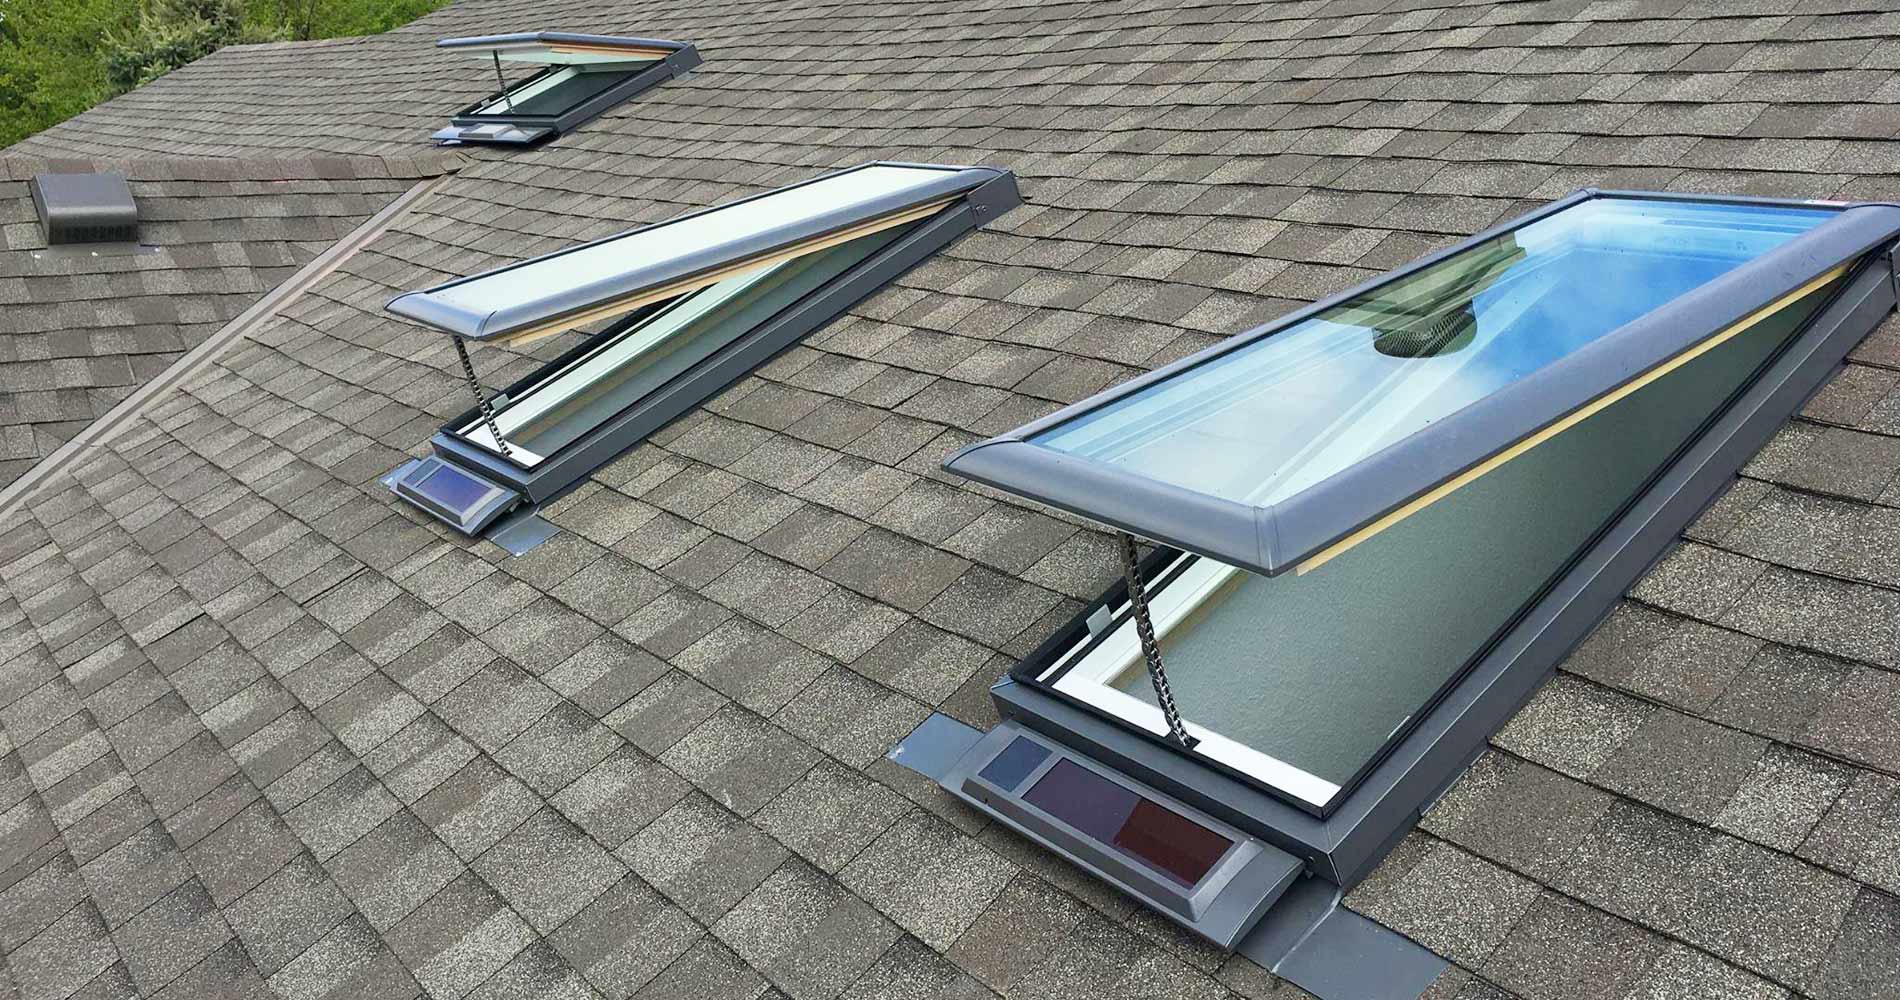 Arias Home Business - Cherry Hill, NJ Skylights Contractors